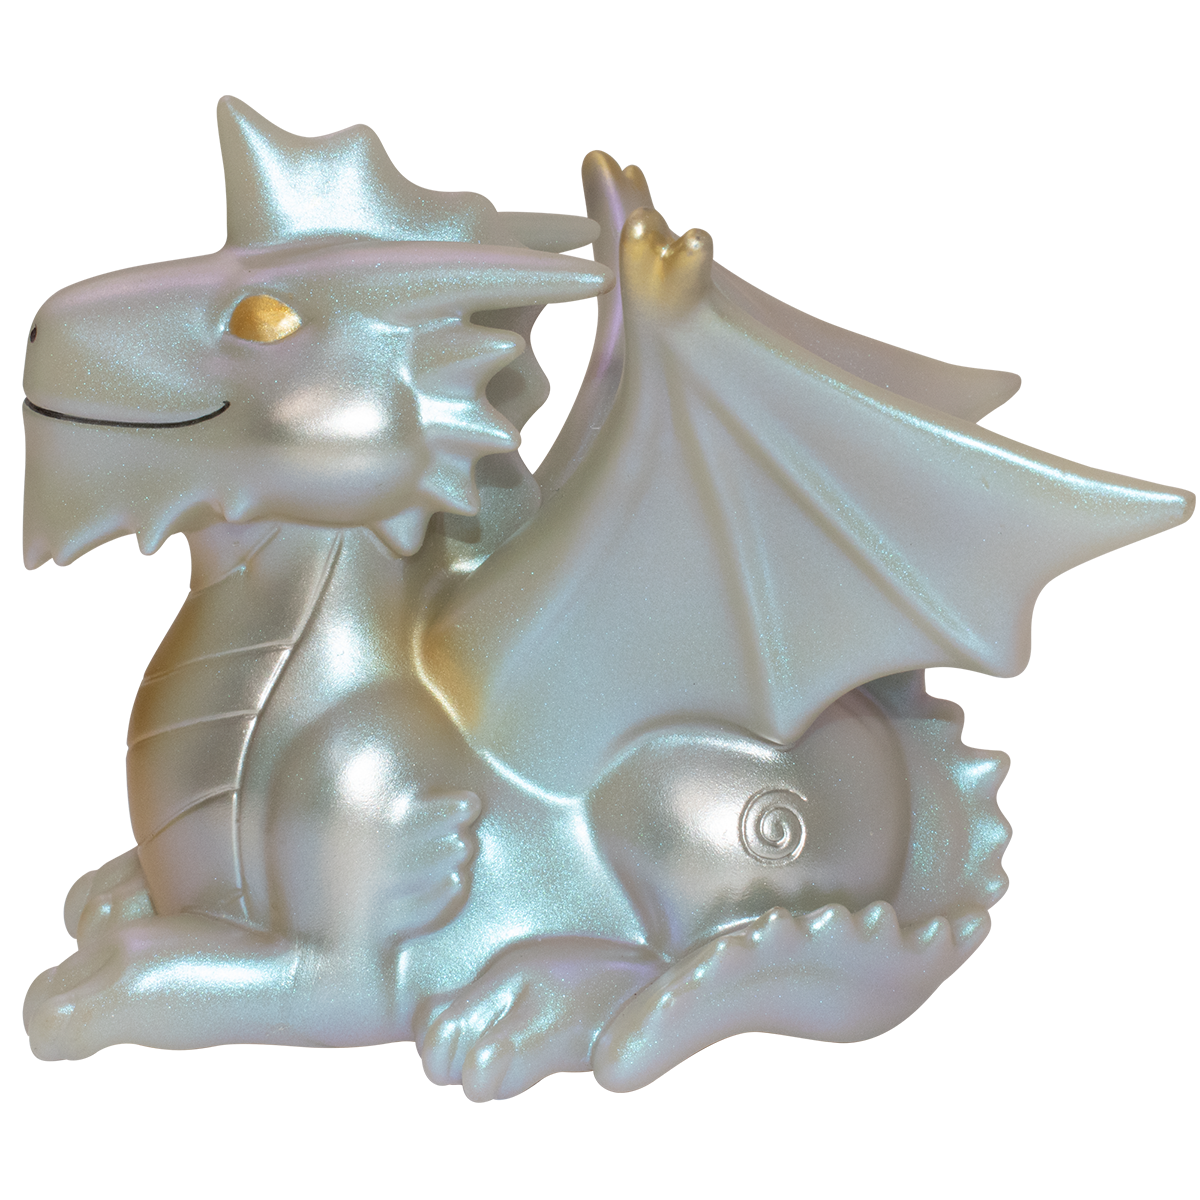 Figurines of Adorable Power: Dungeons & Dragons "Silver Dragon" | Ultra PRO International